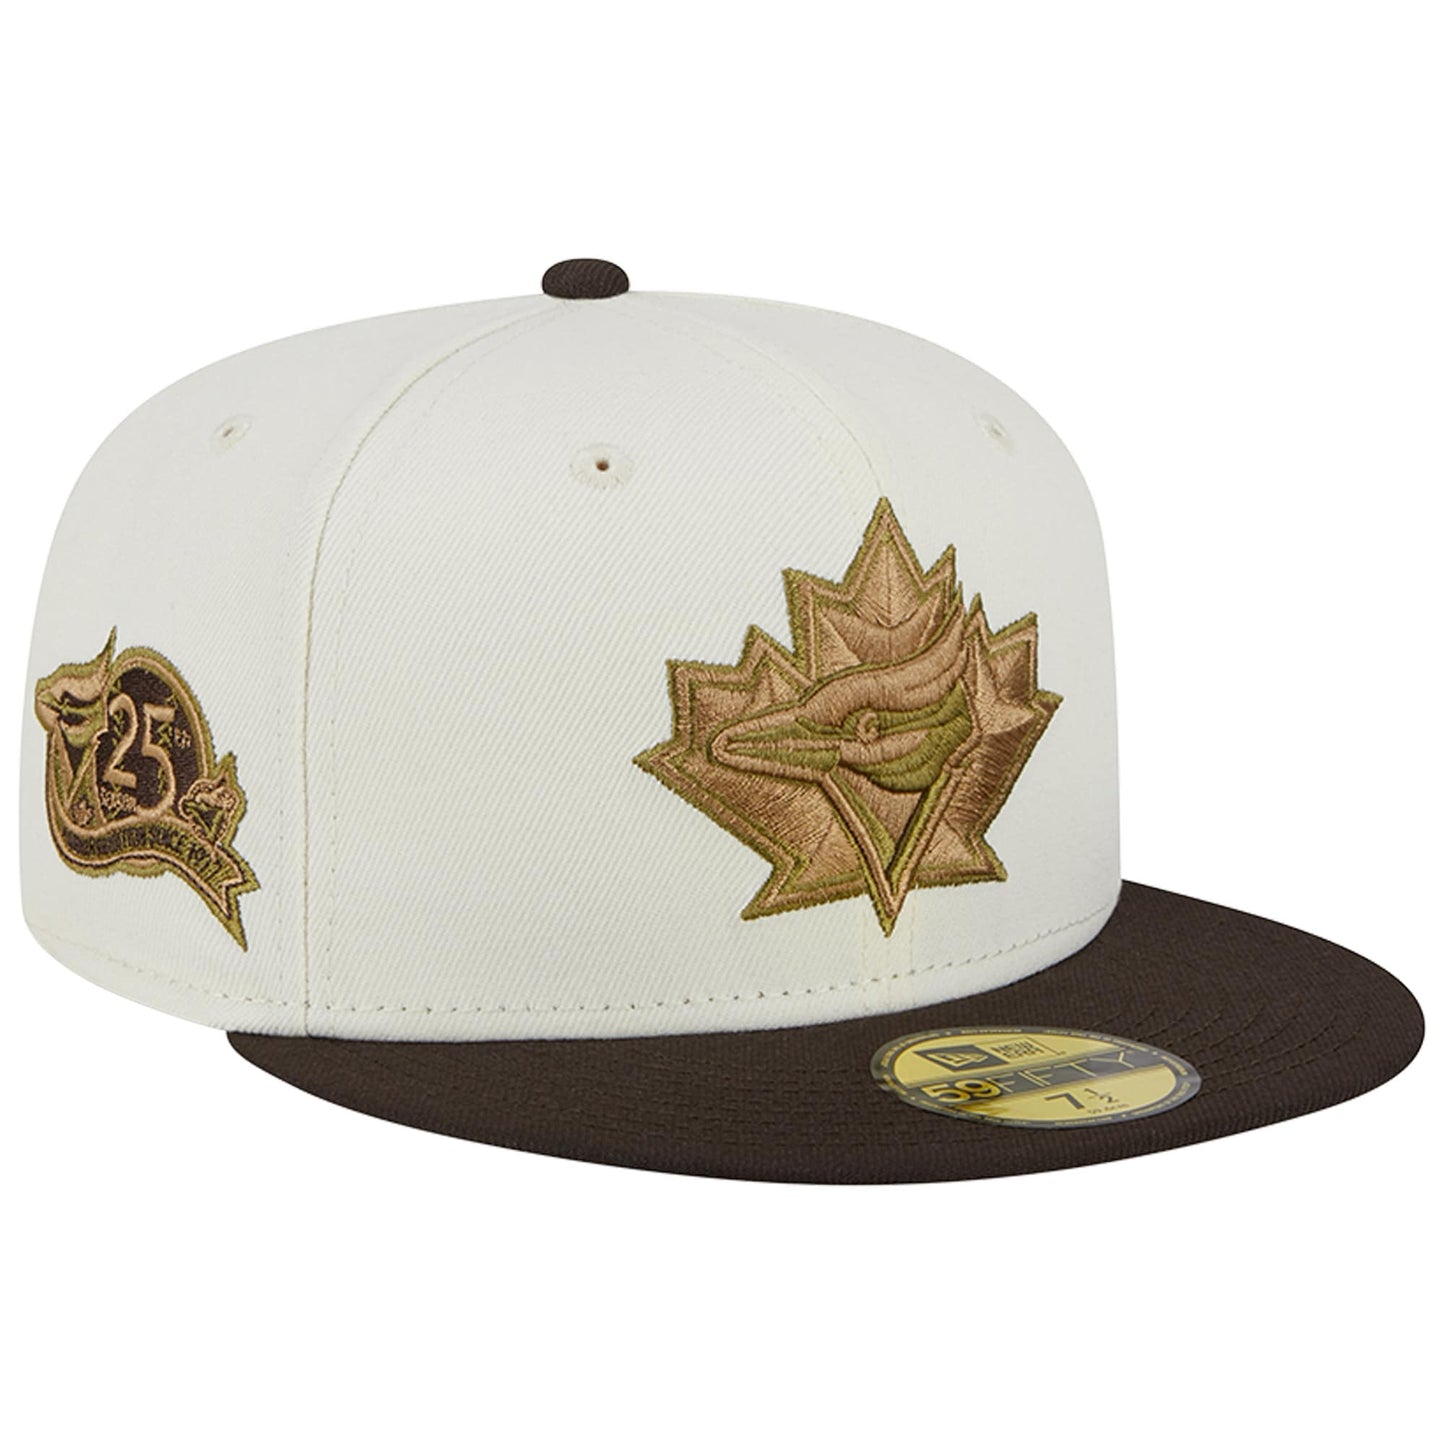 Toronto Blue Jays New Era 25th Team Anniversary 59FIFTY Fitted Hat - White/Brown